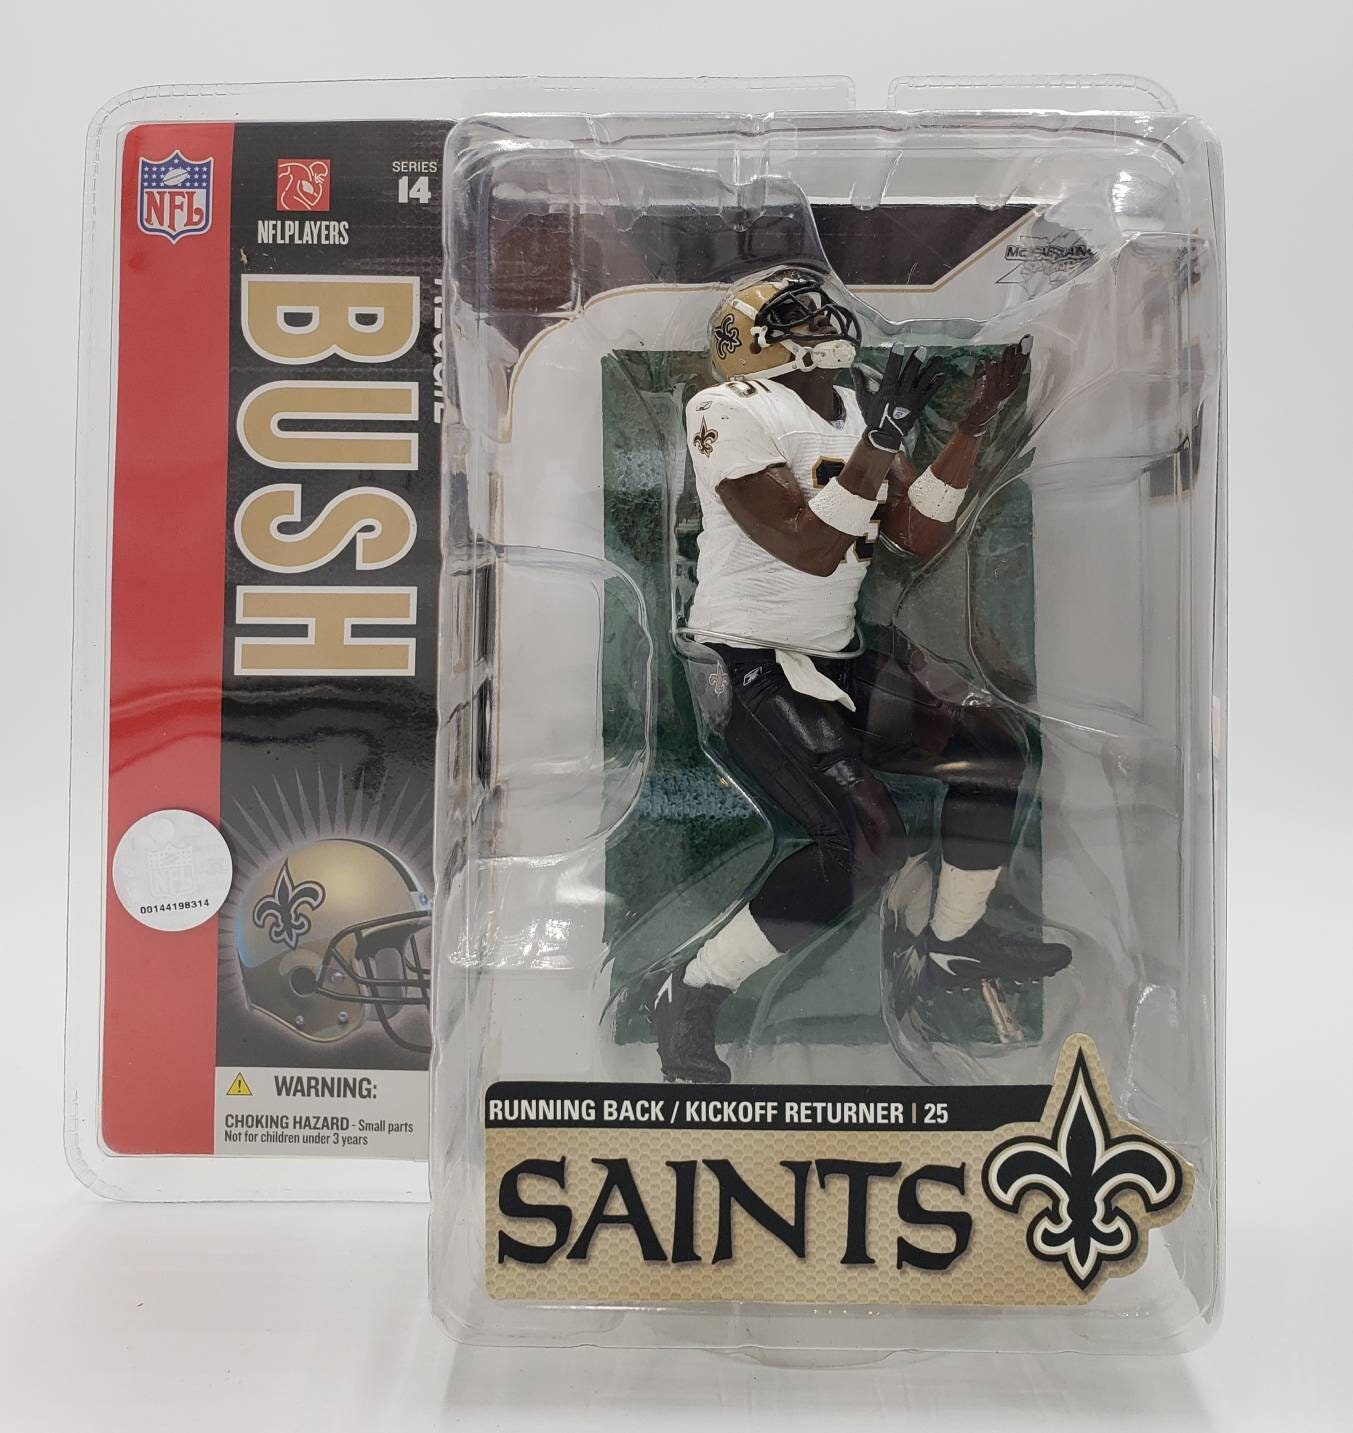 McFarlane Reggie Bush New Orleans Saints White and Black Collectable NFL Action Figure Vintage Football Figurine Perfect Birthday Gift